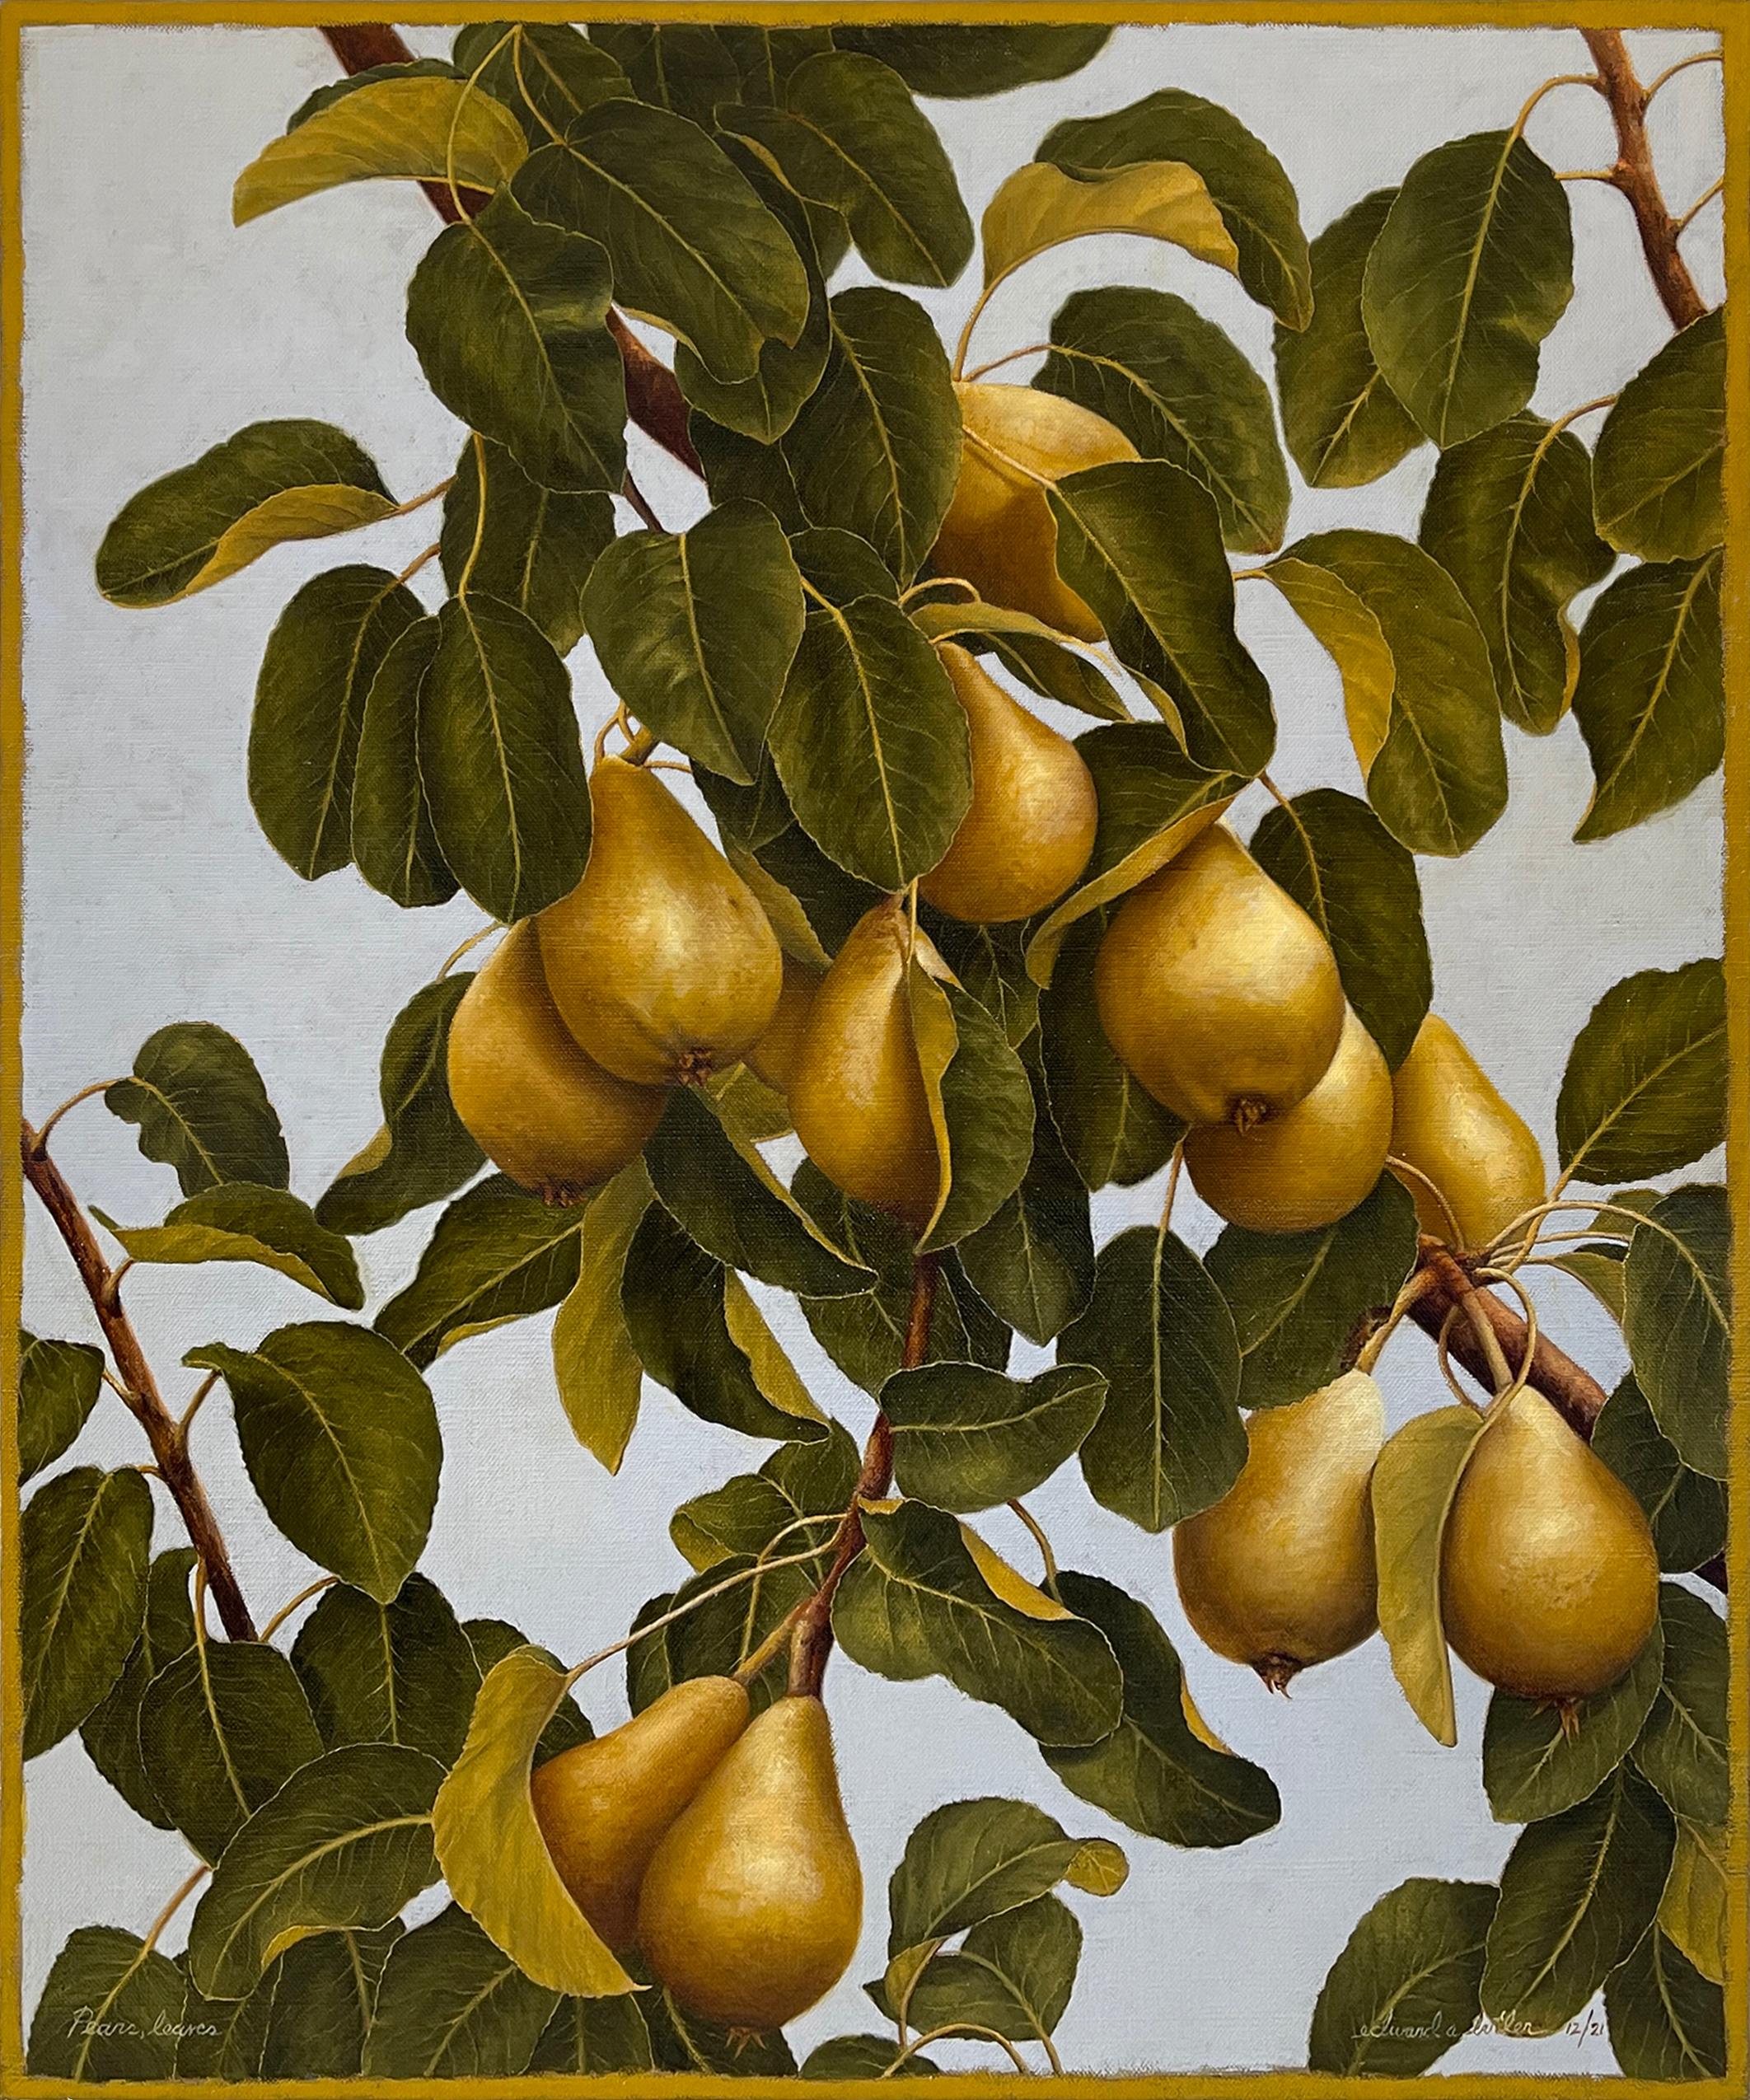 PEARS, LEAVES - Fruit Still Life Painting with Vivid Details